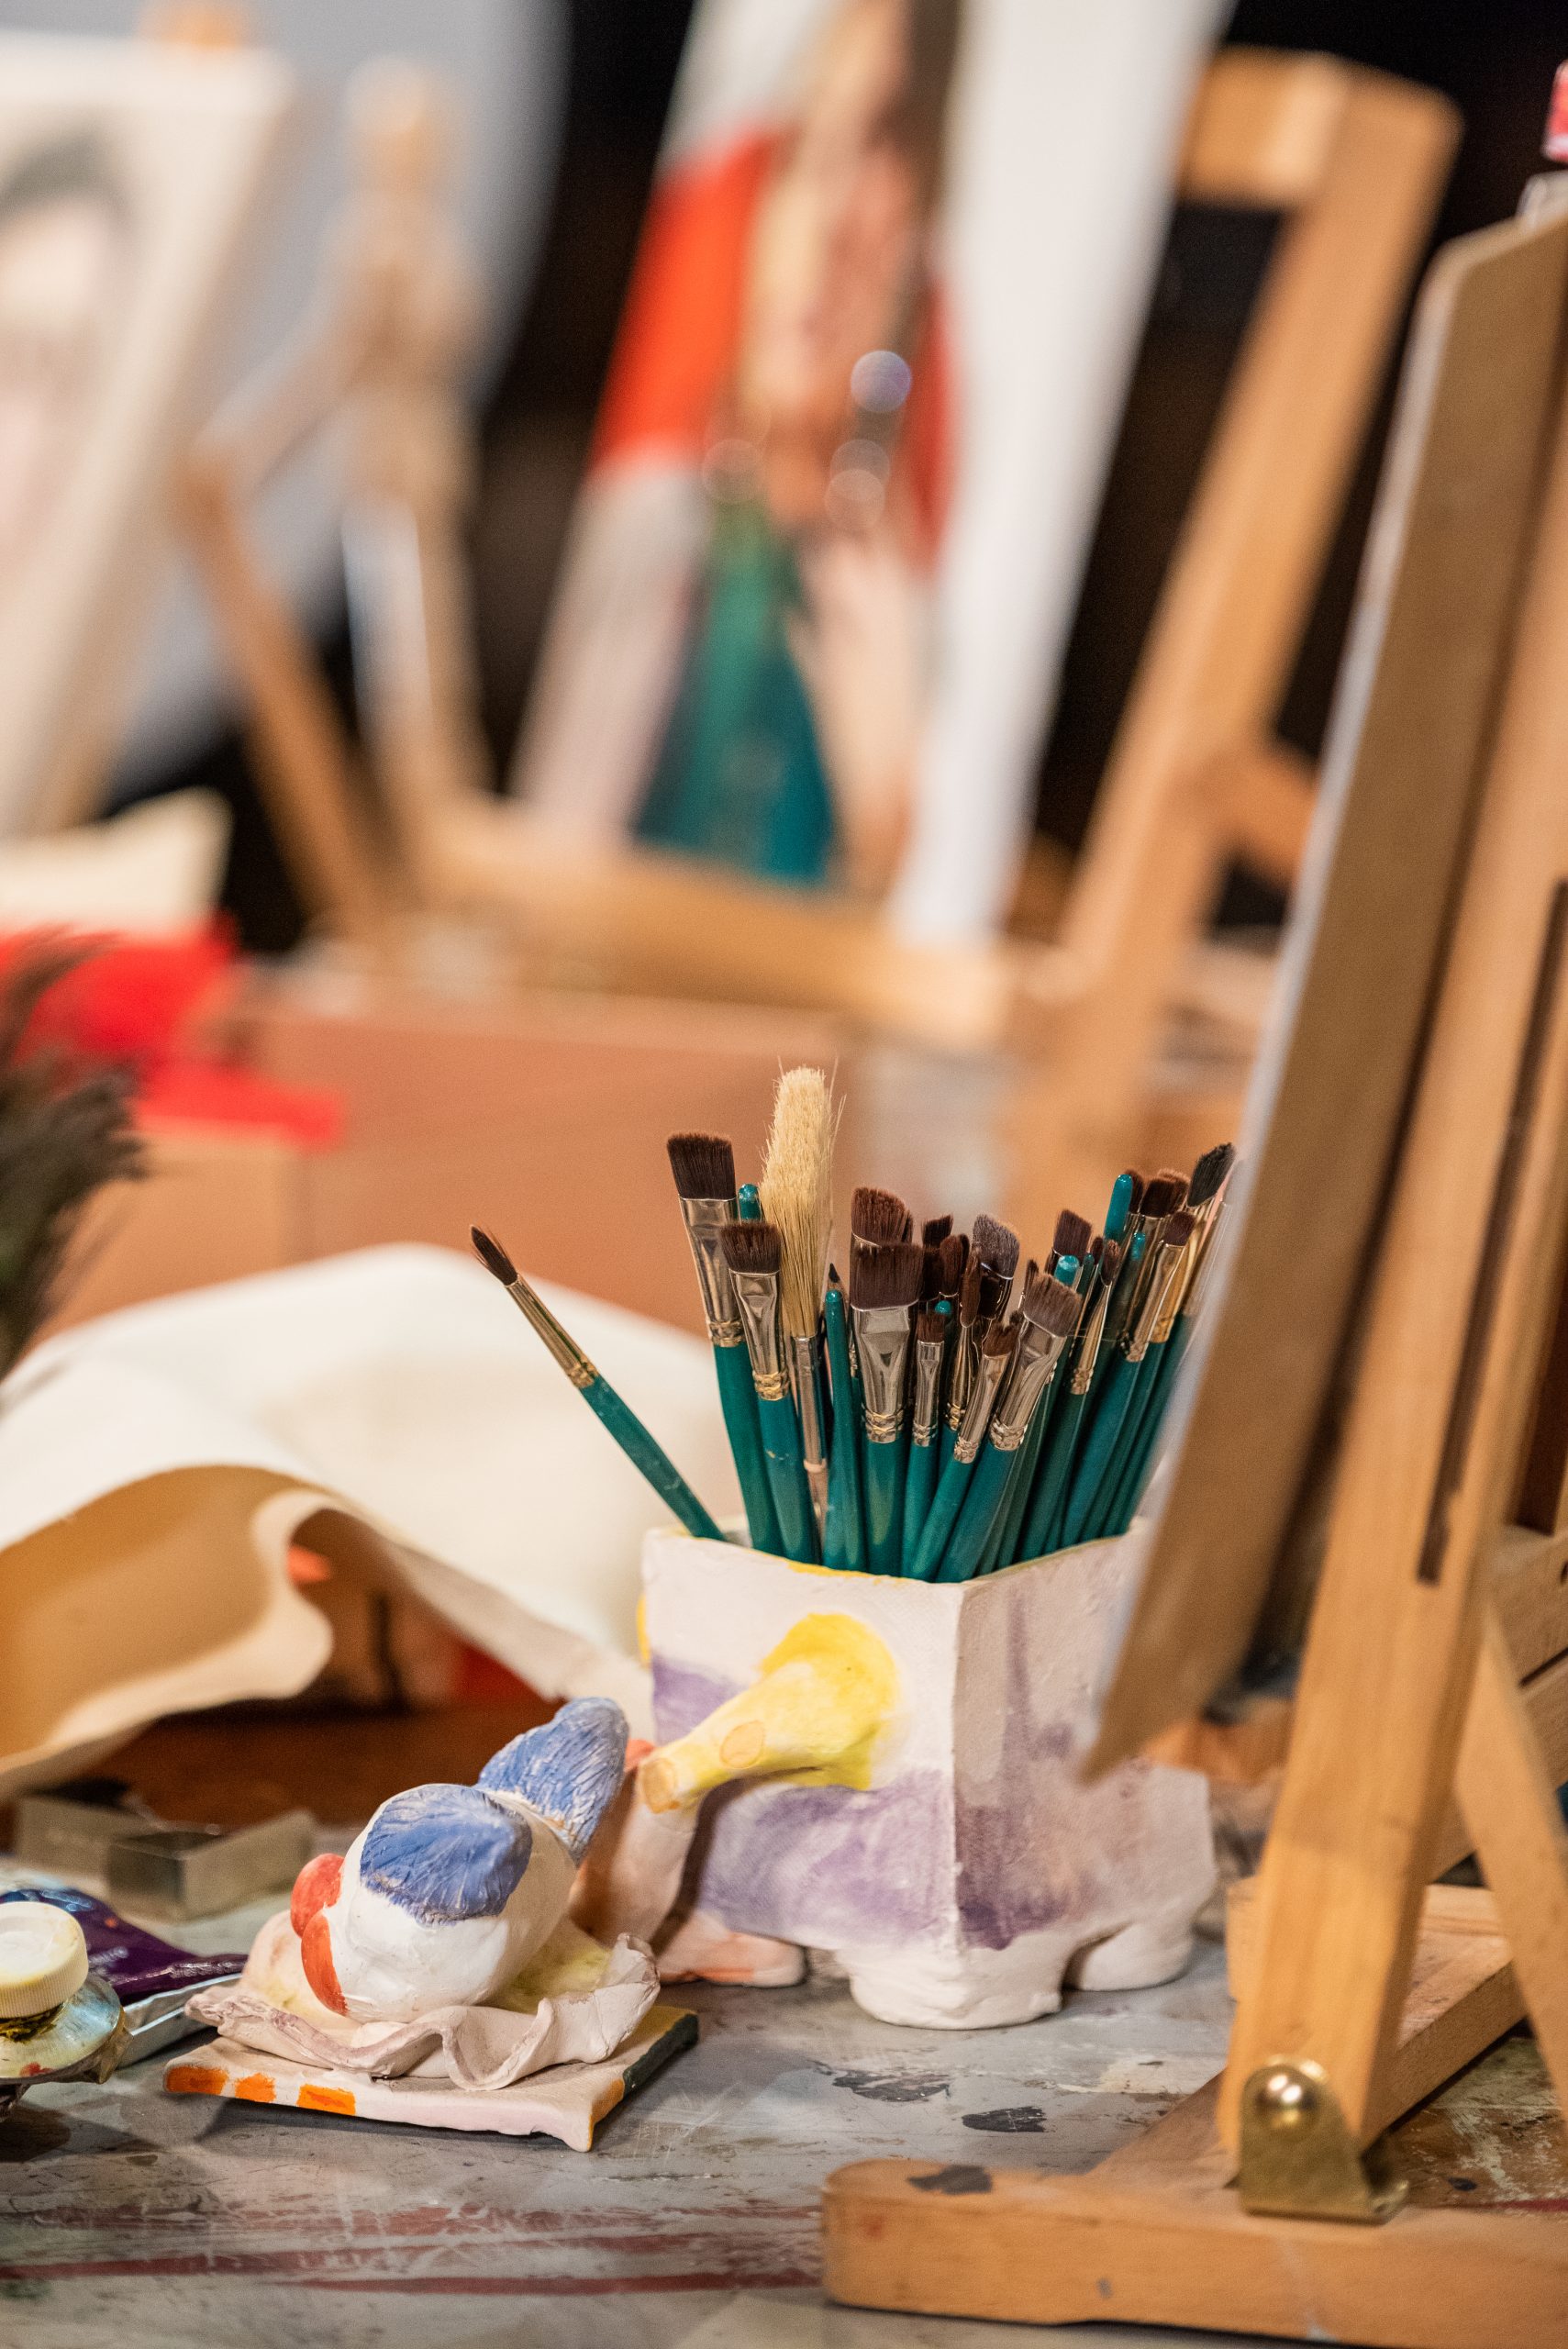 A messy paint studio with oil paintings in the background and paintbrushes in a pot in the foreground.